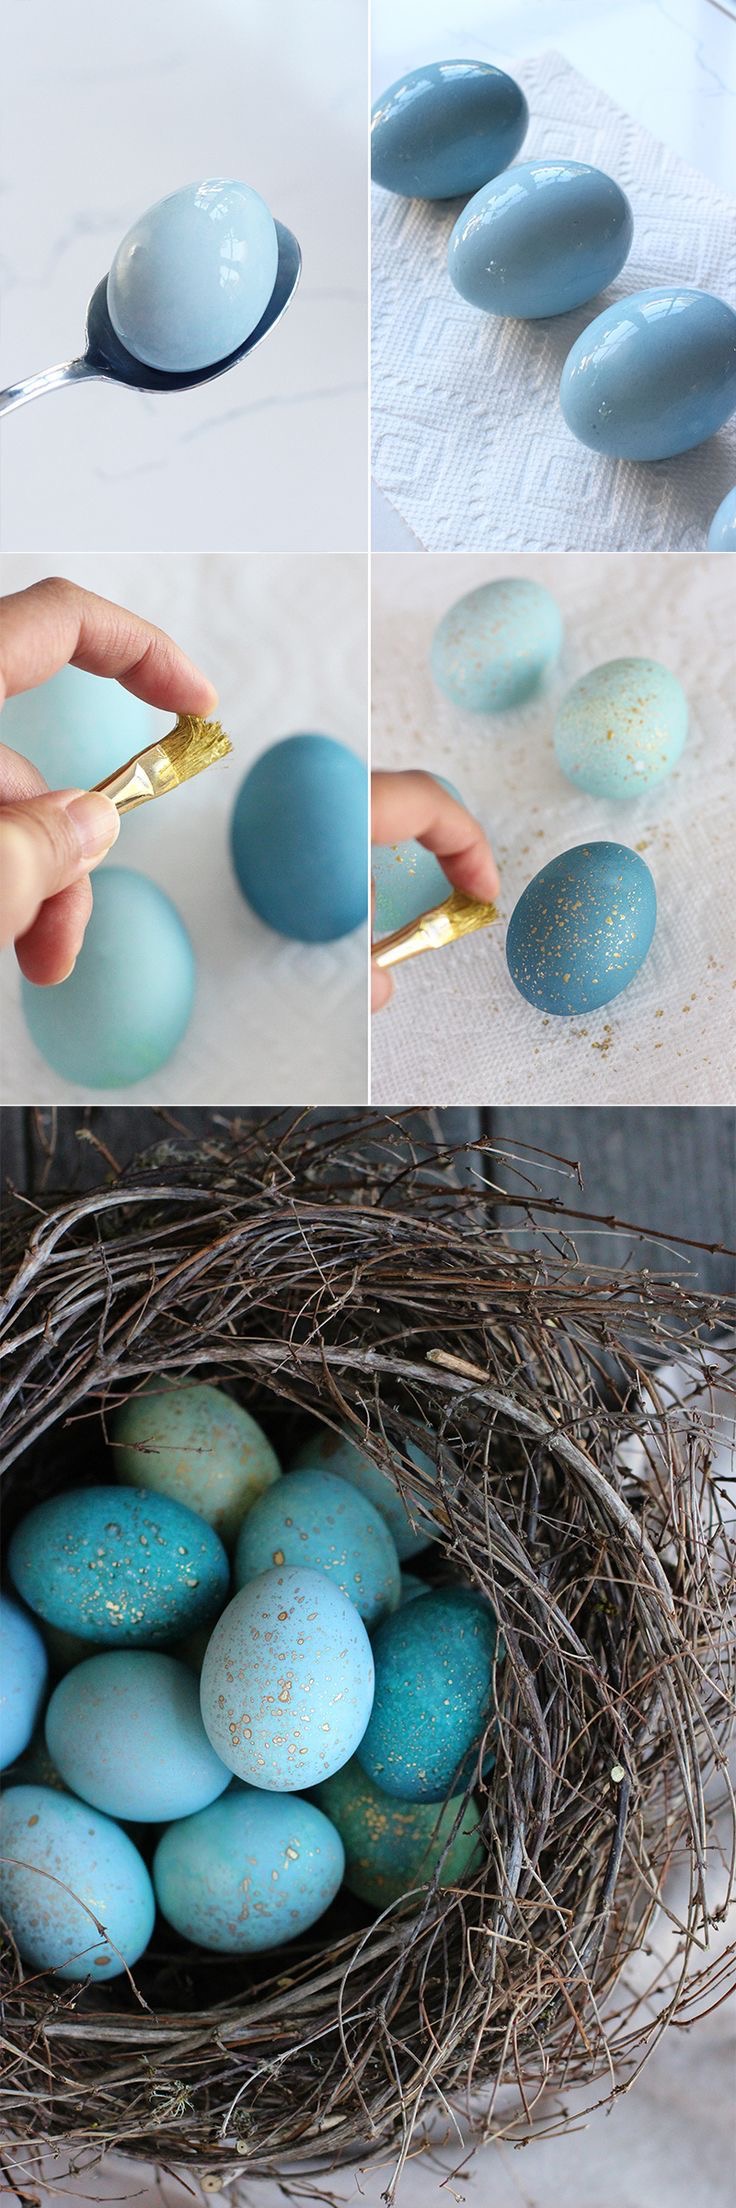 12 Creative Ways to Decorate Easter eggs....